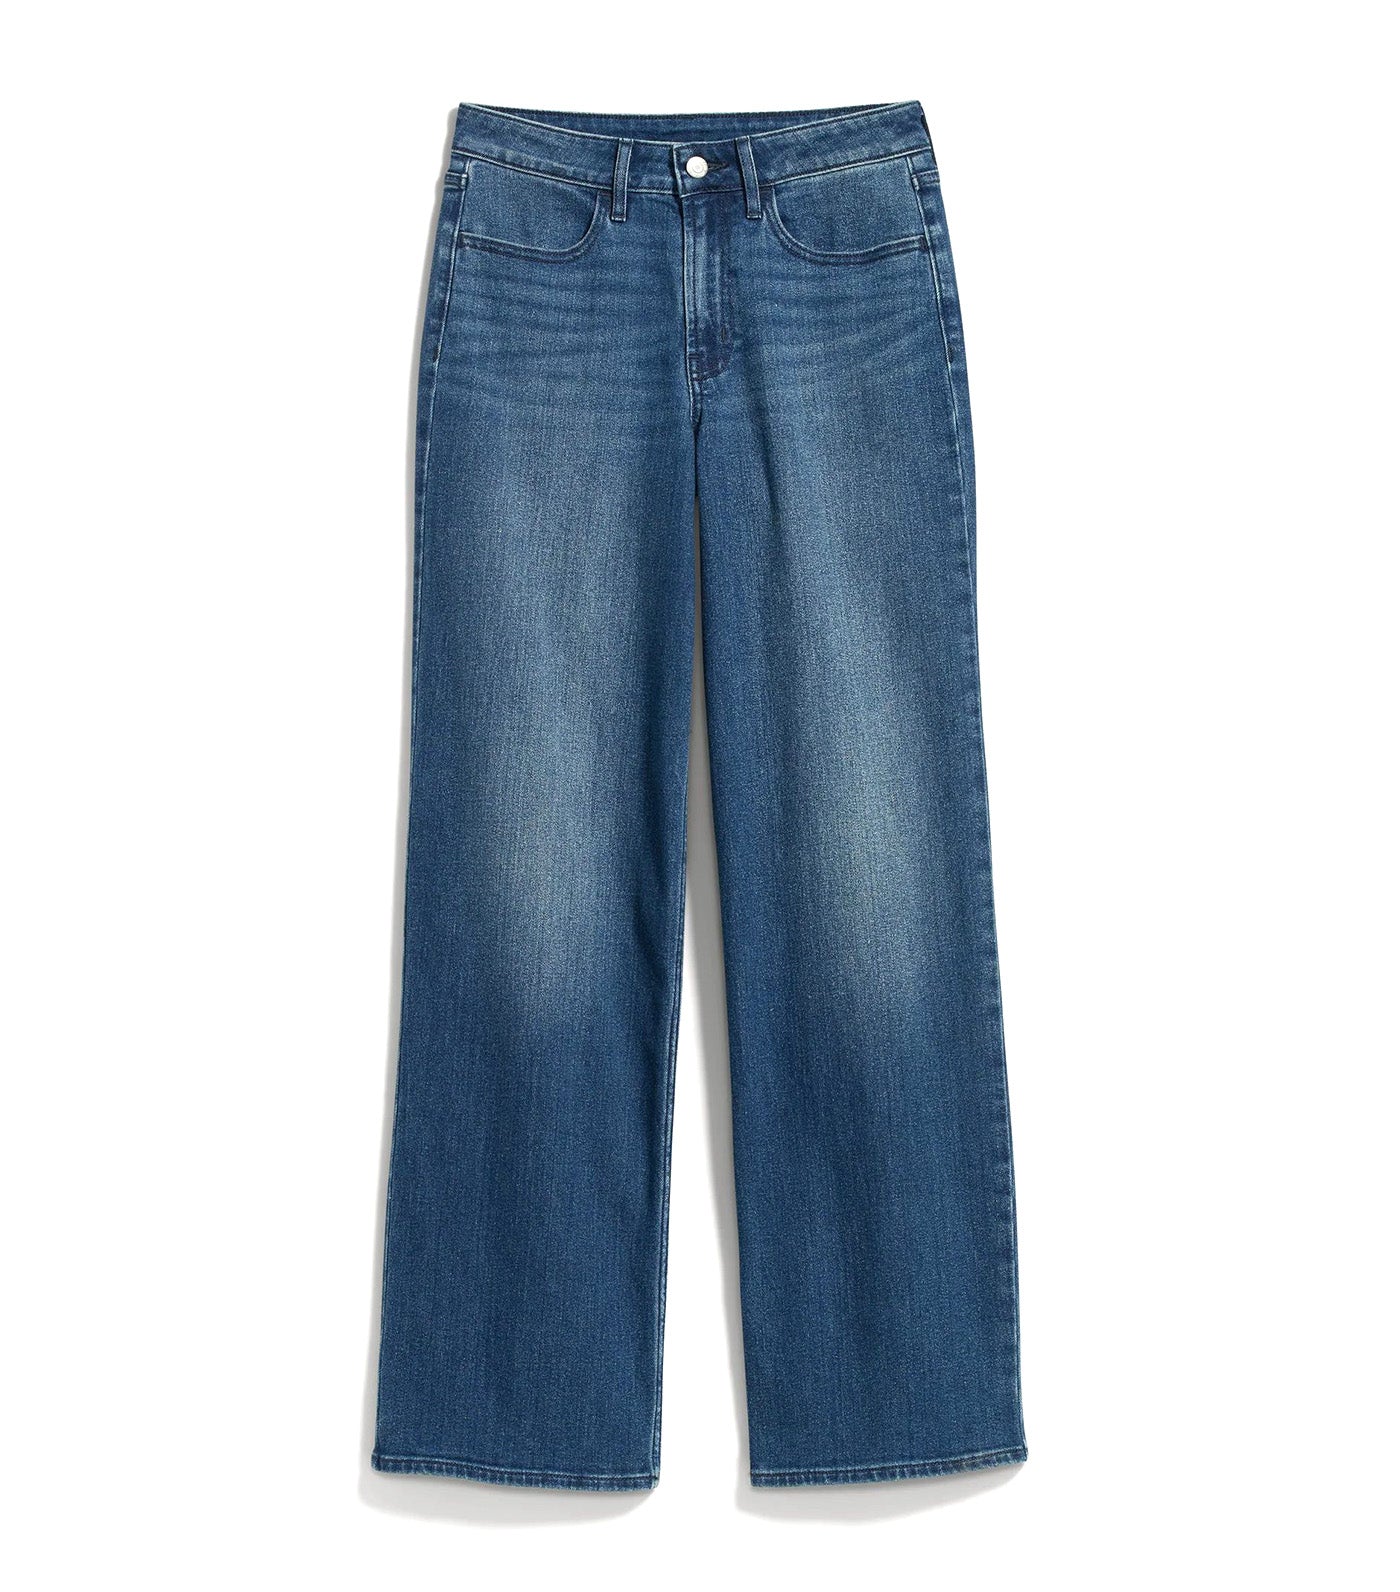 High-Waisted Wow Wide-Leg Jeans for Women Campeche